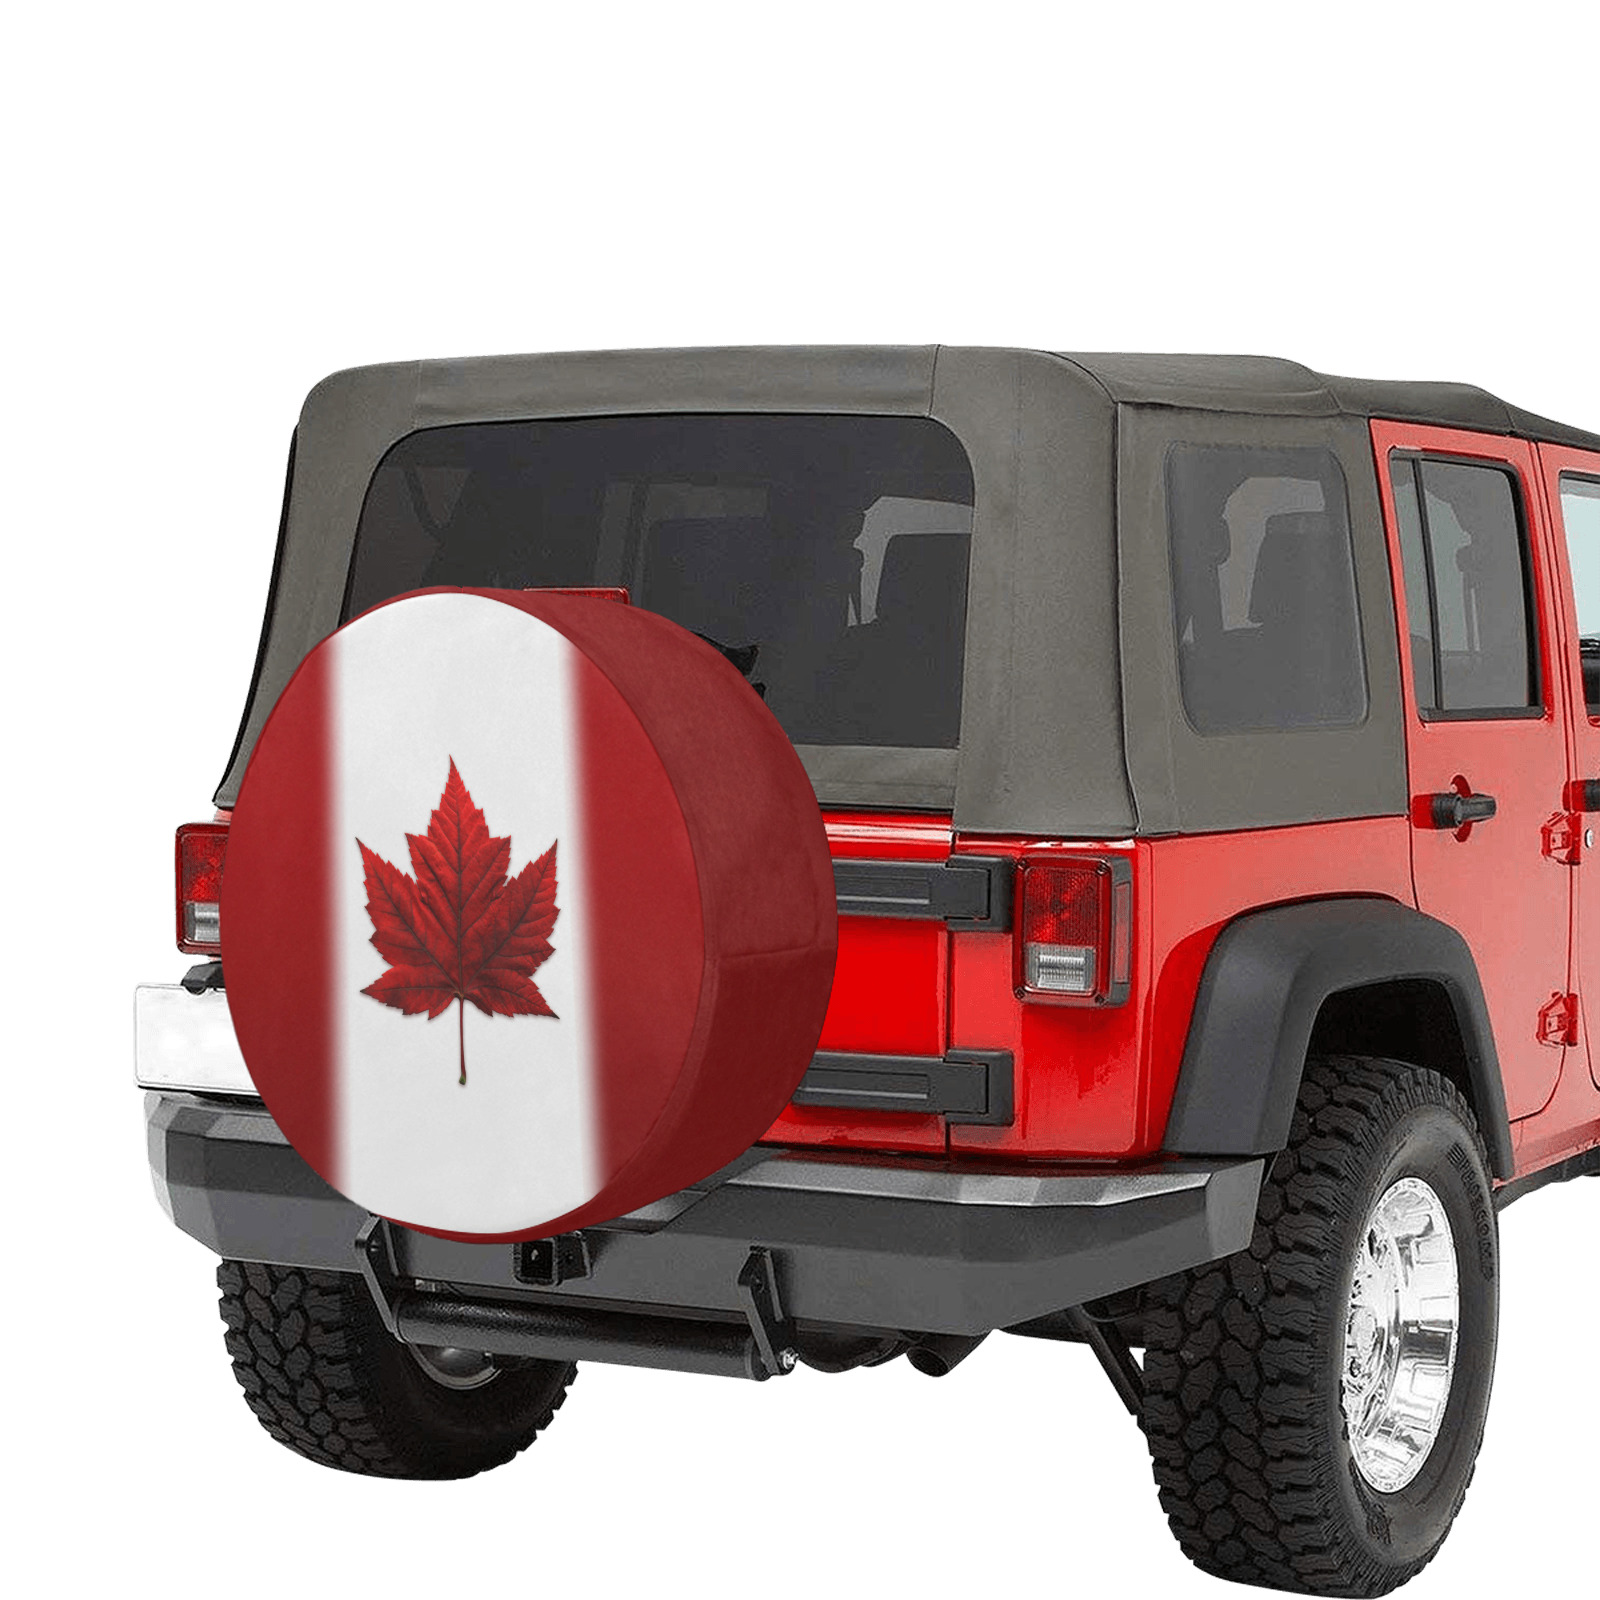 Canada_Flag_Gifts 9038 8148 34 Inch Spare Tire Cover